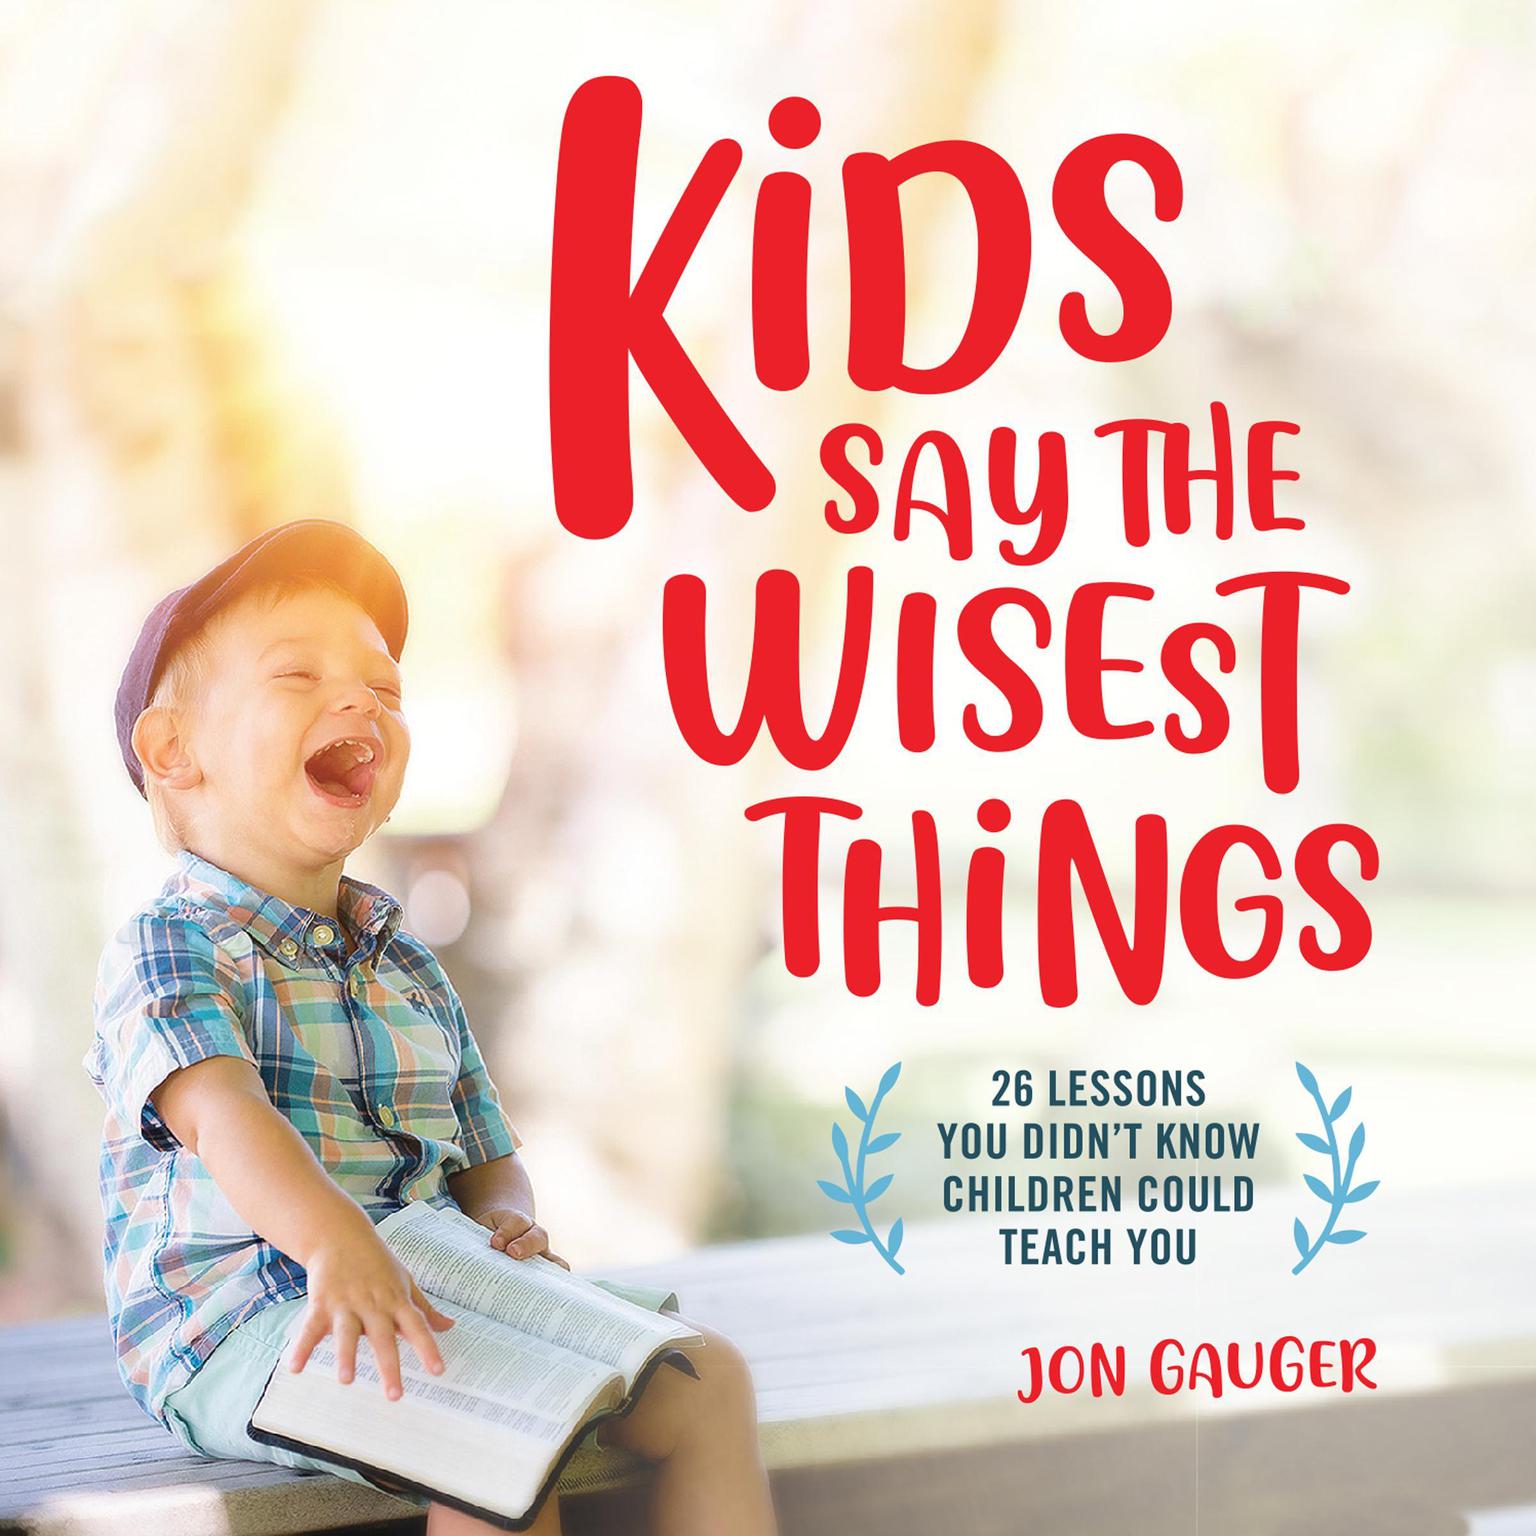 Kids Say the Wisest Things: 26 Lessons You Didnt Know Children Could Teach You Audiobook, by Jon Gauger